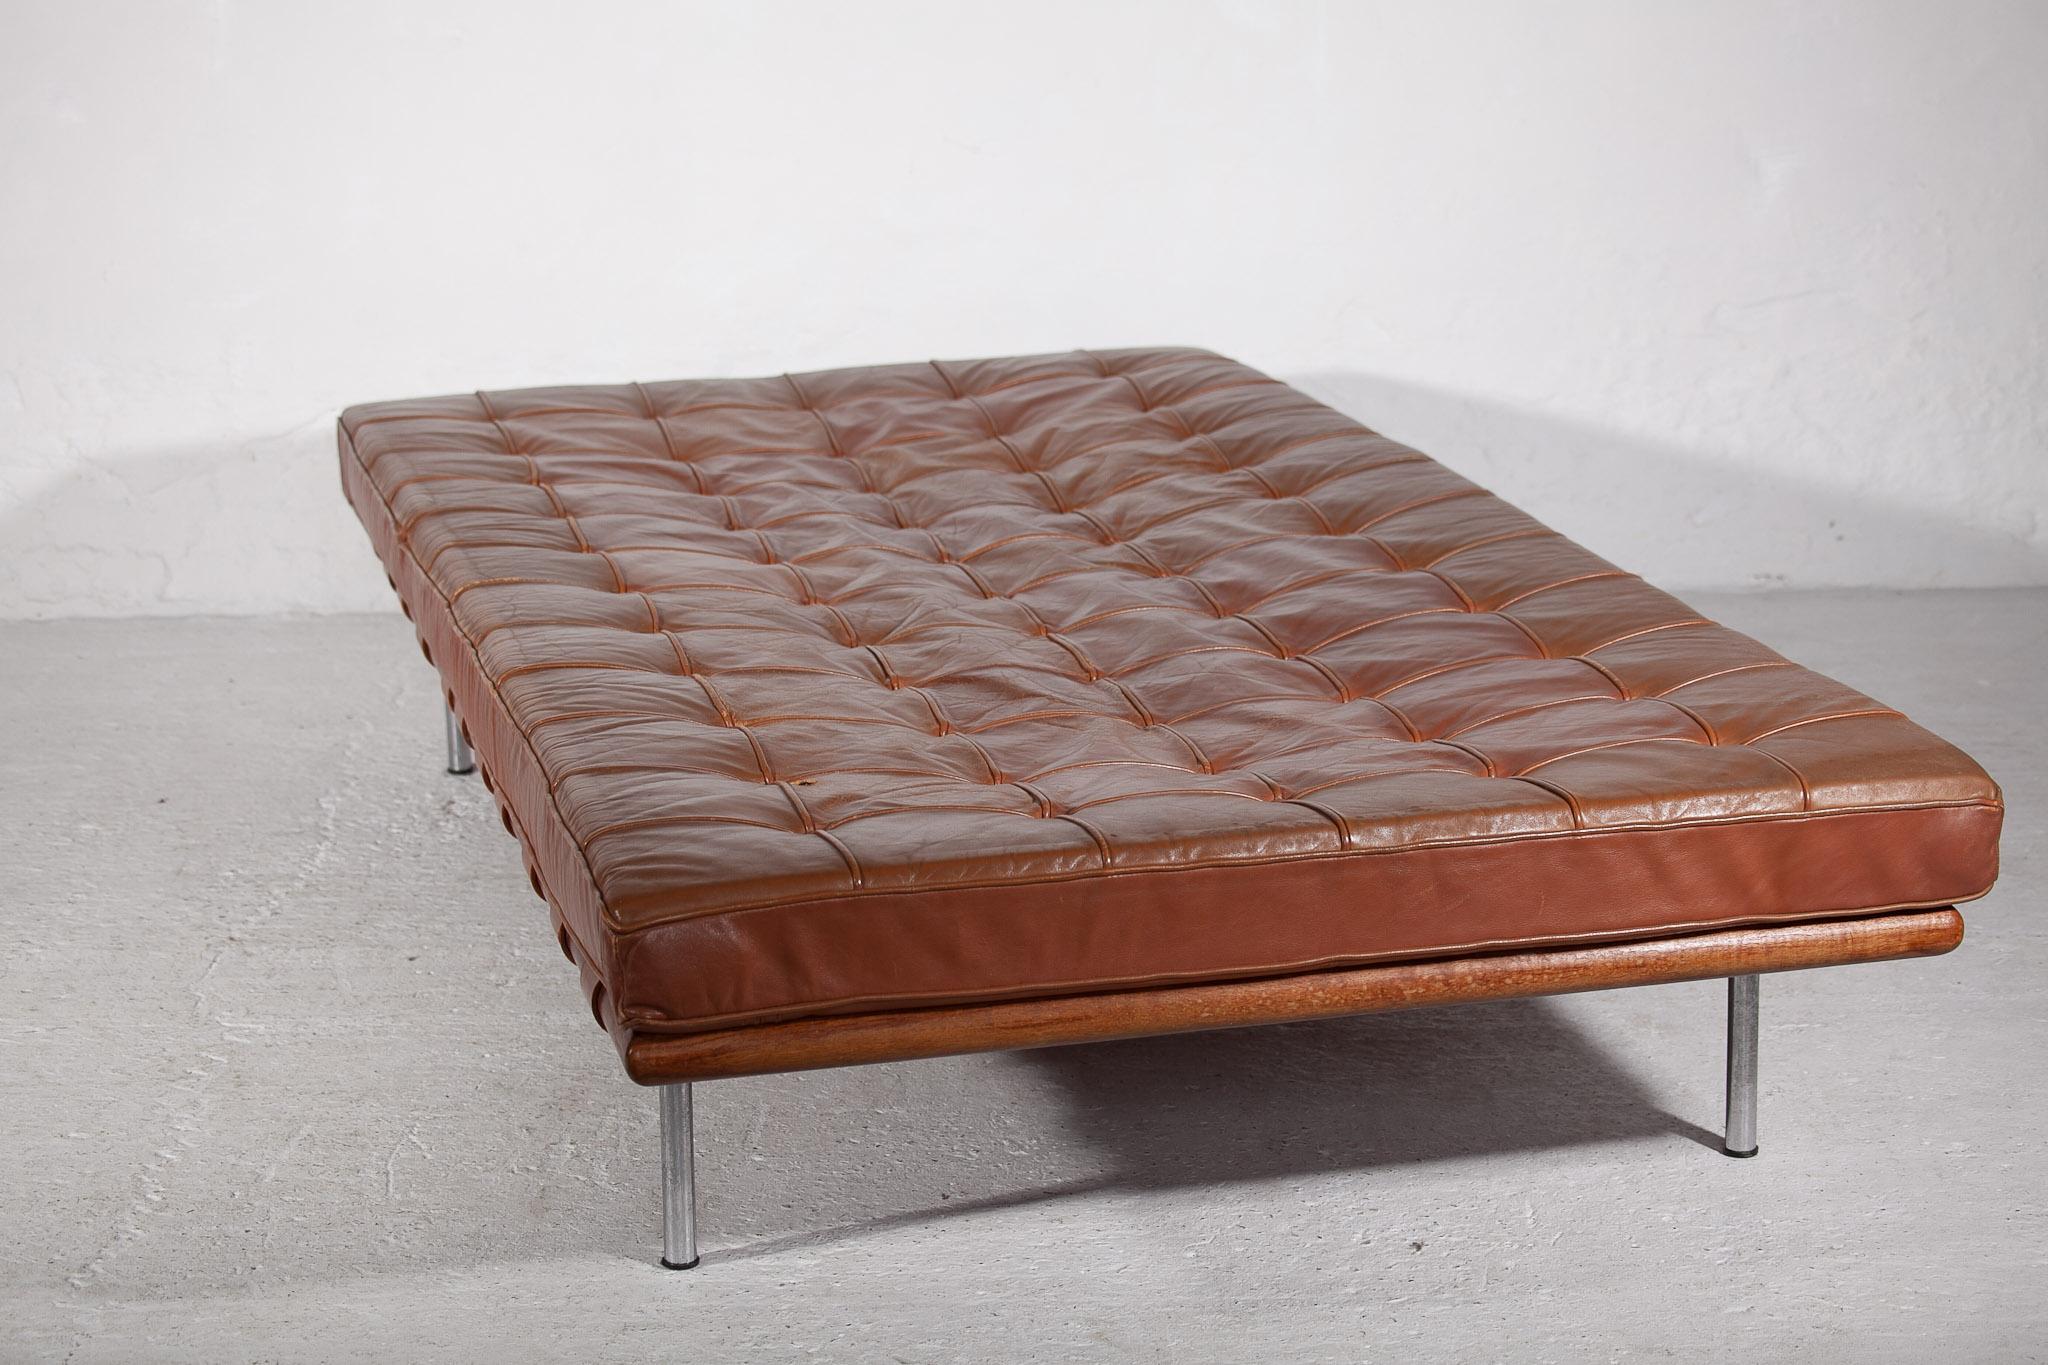 Brown Leather Barcelona Daybed by Ludwig Mies van der Rohe, für Knoll (Metall) im Angebot